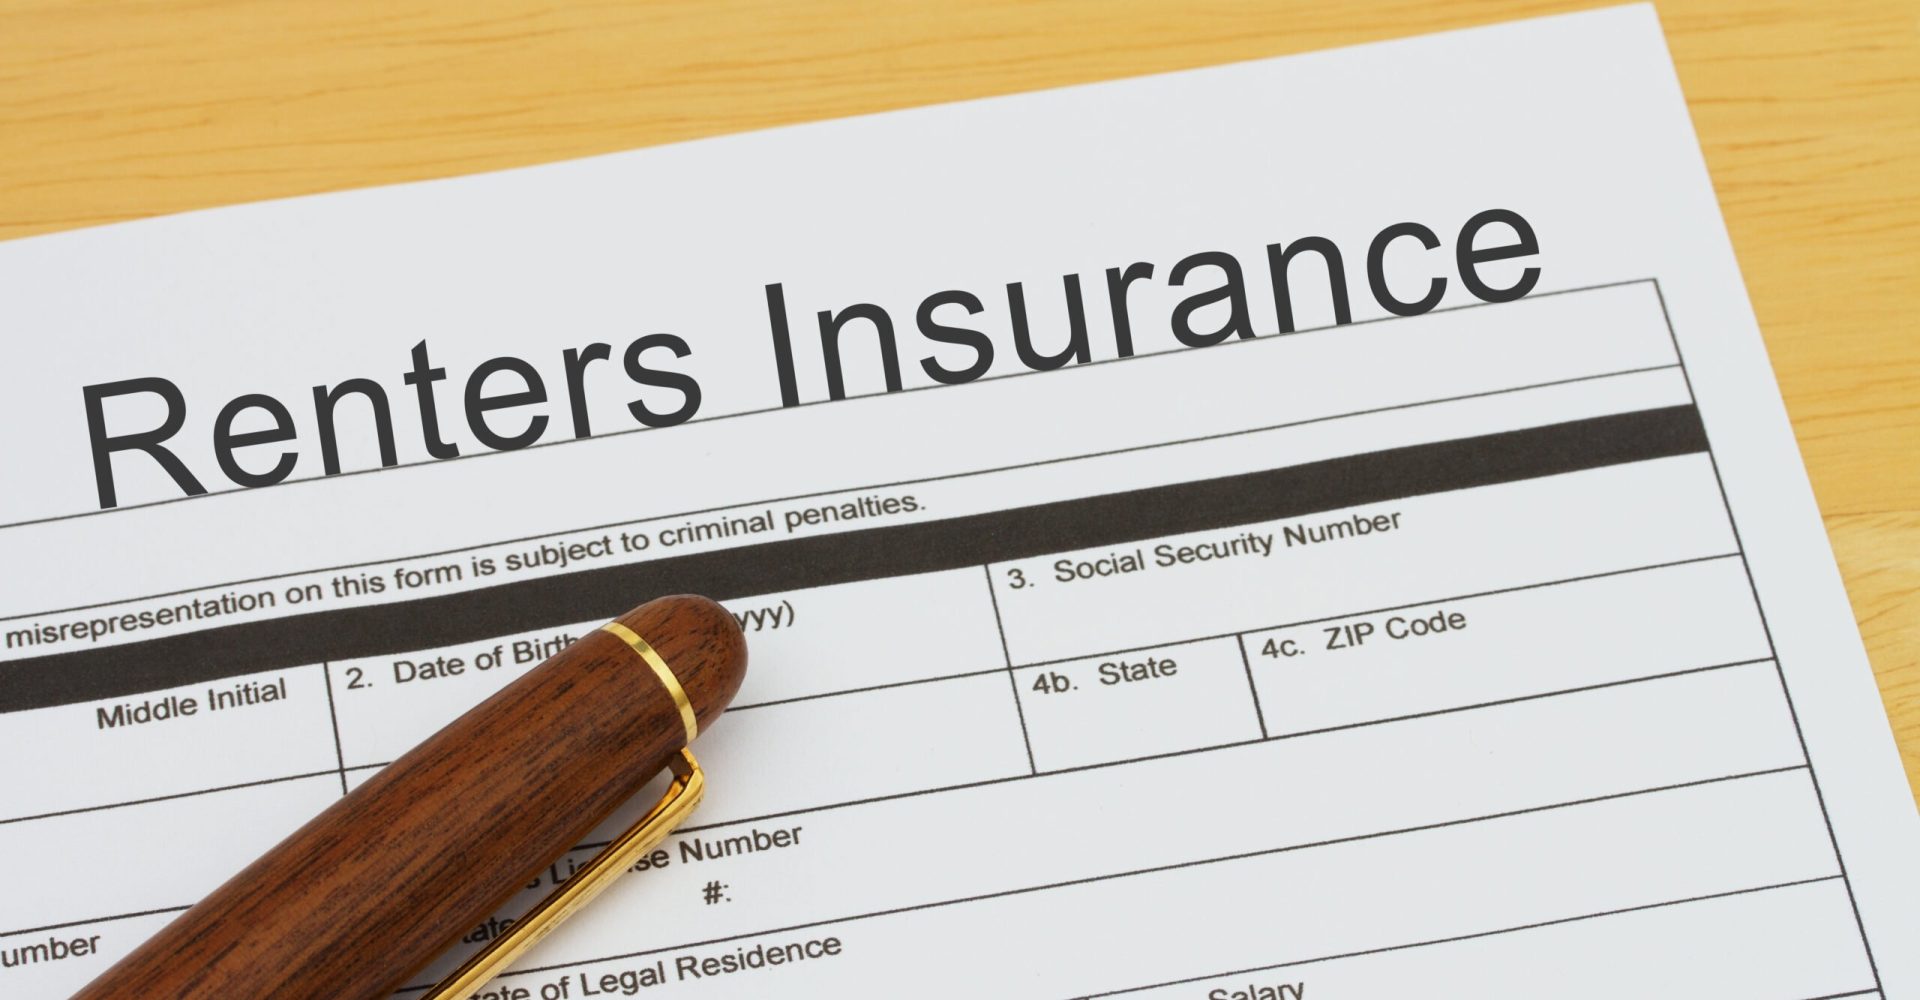 Applying for a Renters Insurance